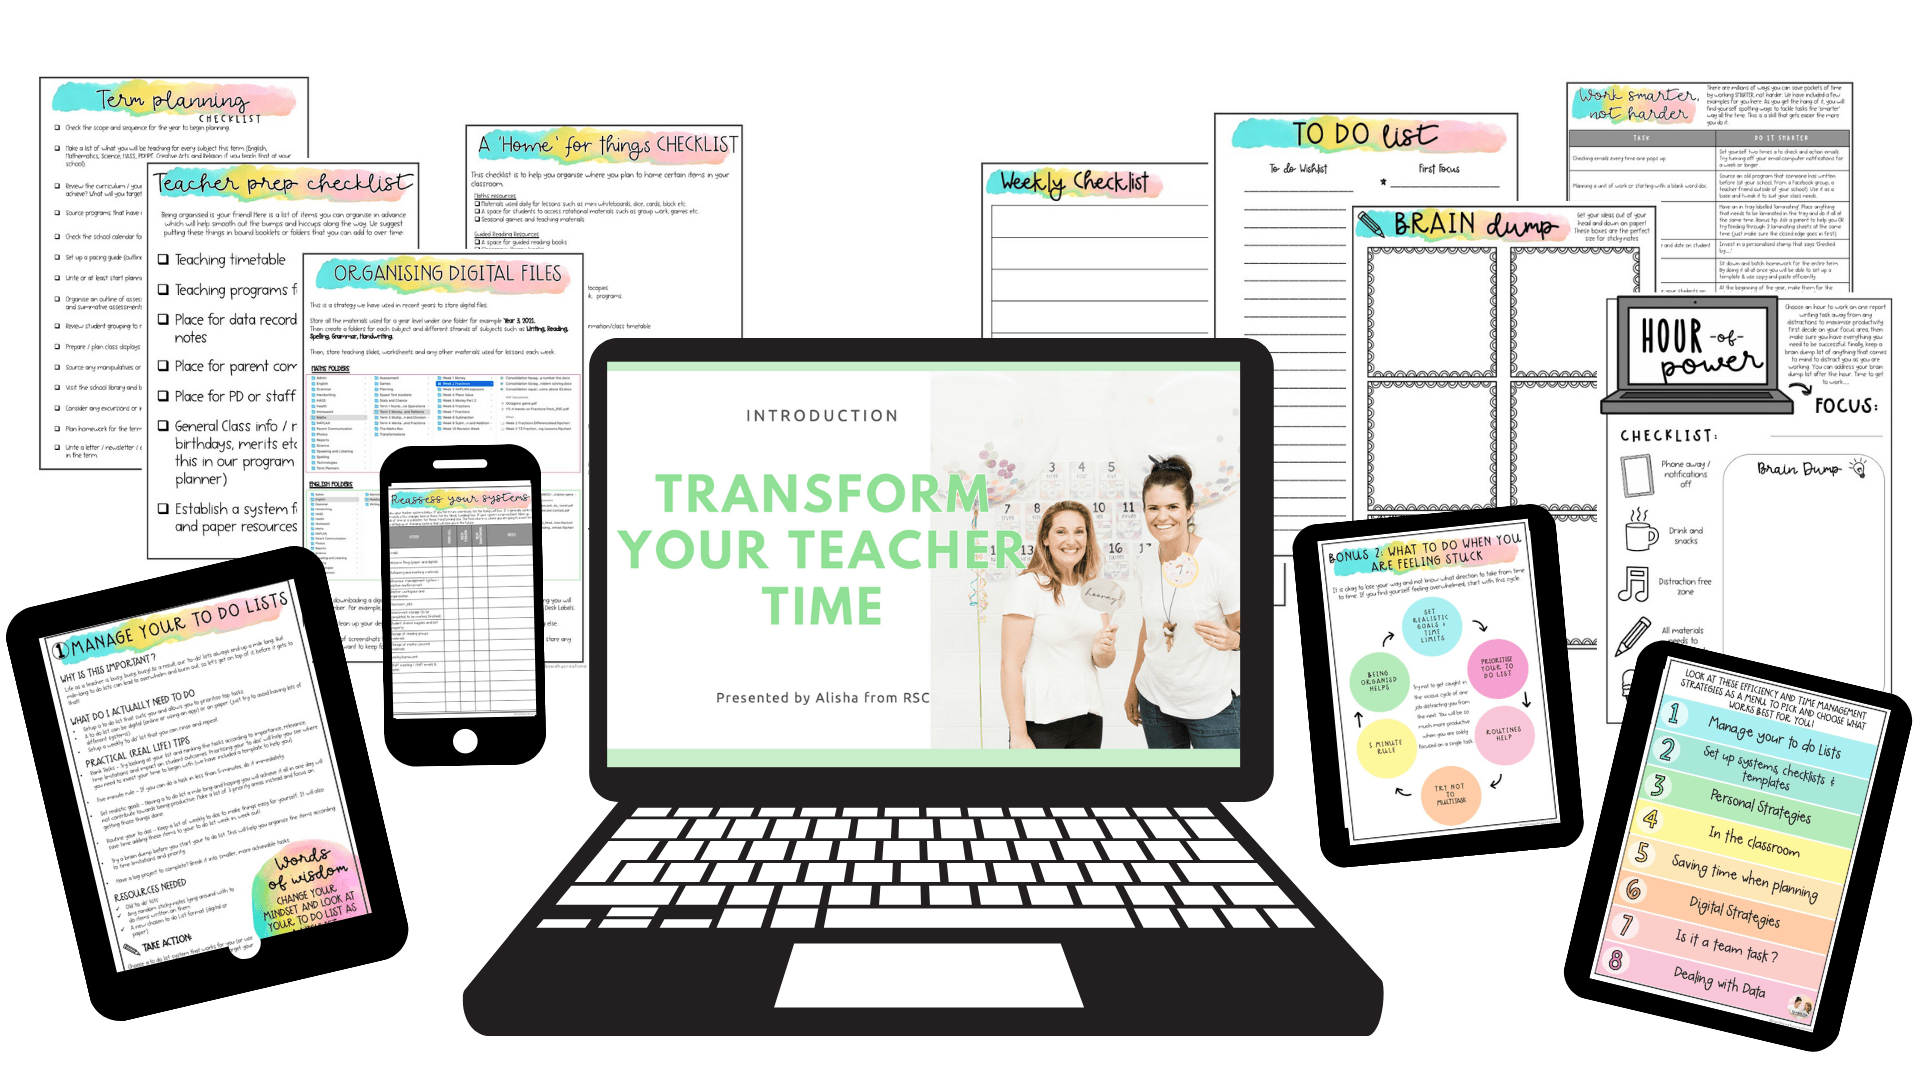 What-is-included-inside-Transform-your-teacher-time